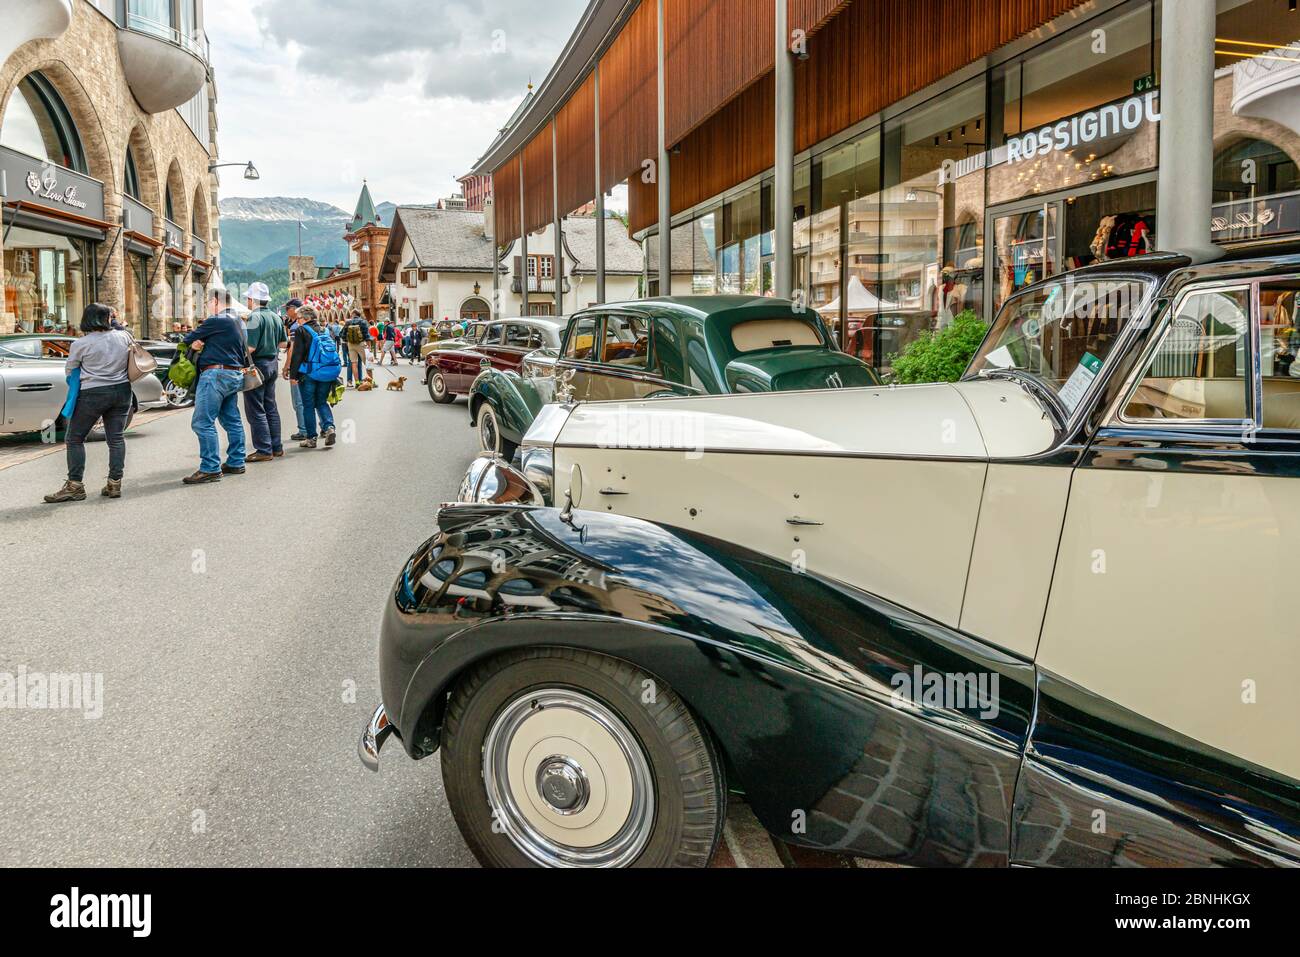 Rolls Royce vintage car on display at British Classic Car Meeting 2019, St.Moritz, Grisons, Switzerland Stock Photo